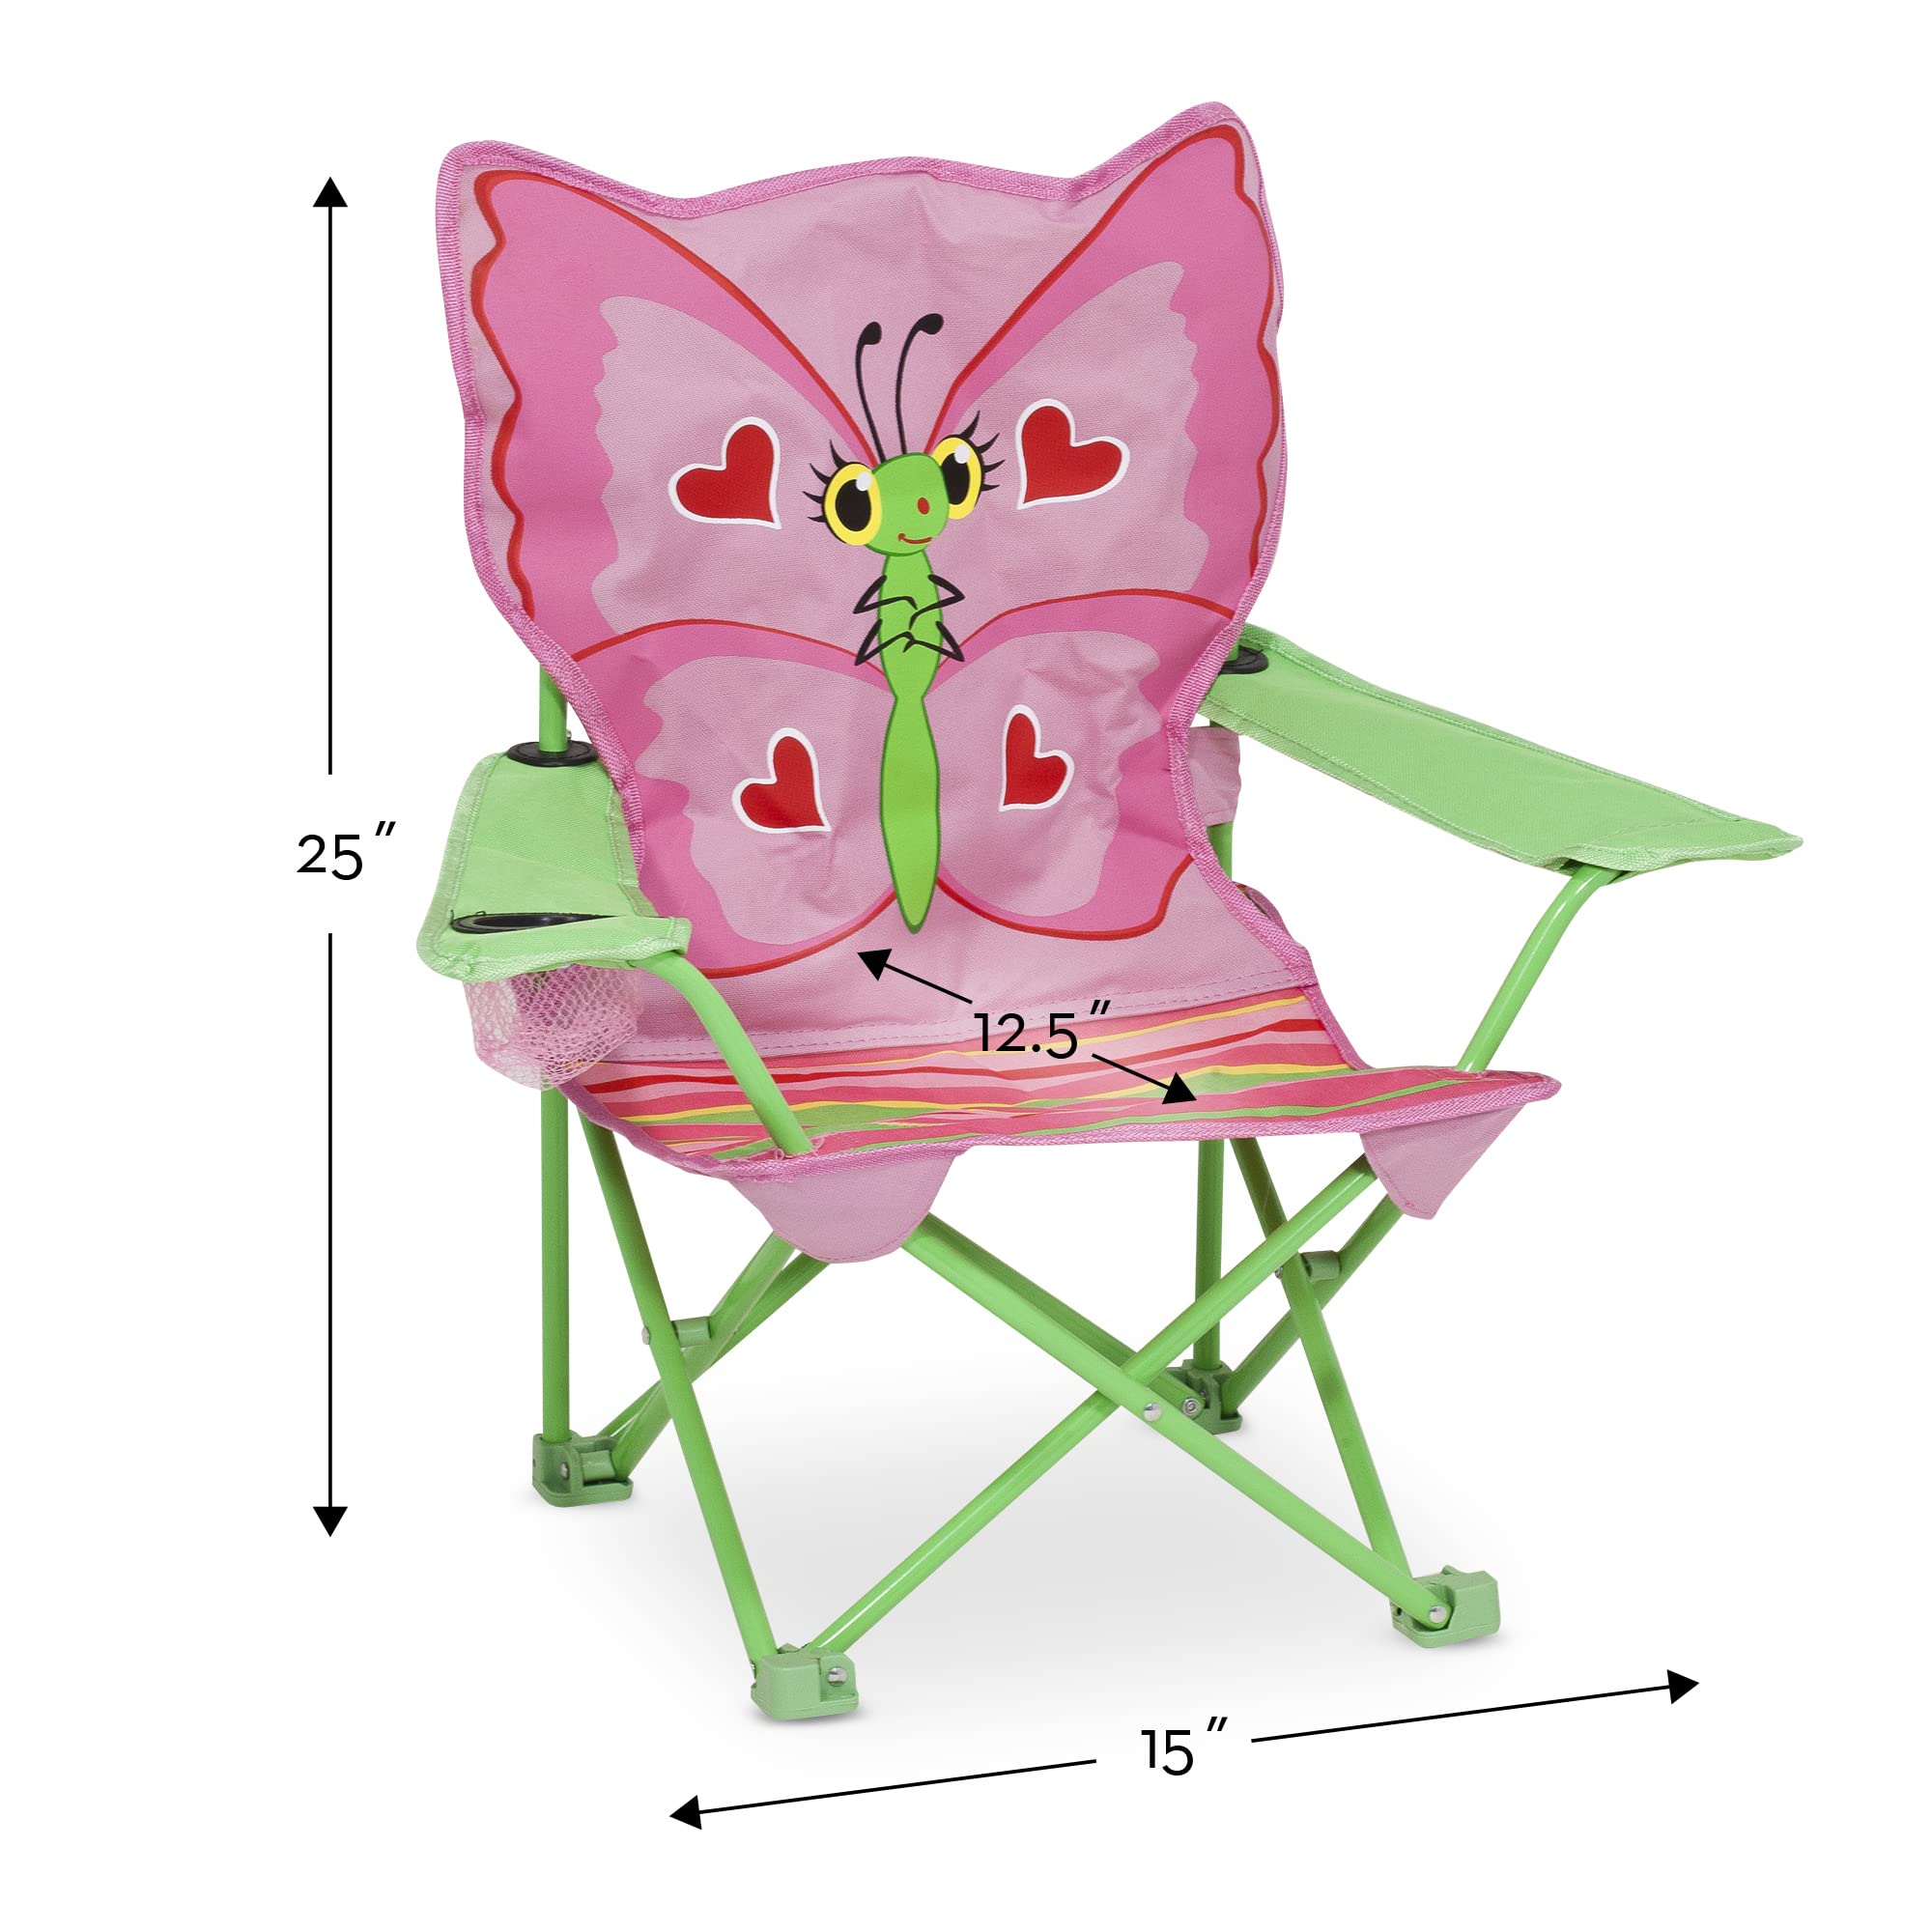 Melissa & Doug Bella Butterfly Child's Outdoor Chair (Frustration-Free Packaging)